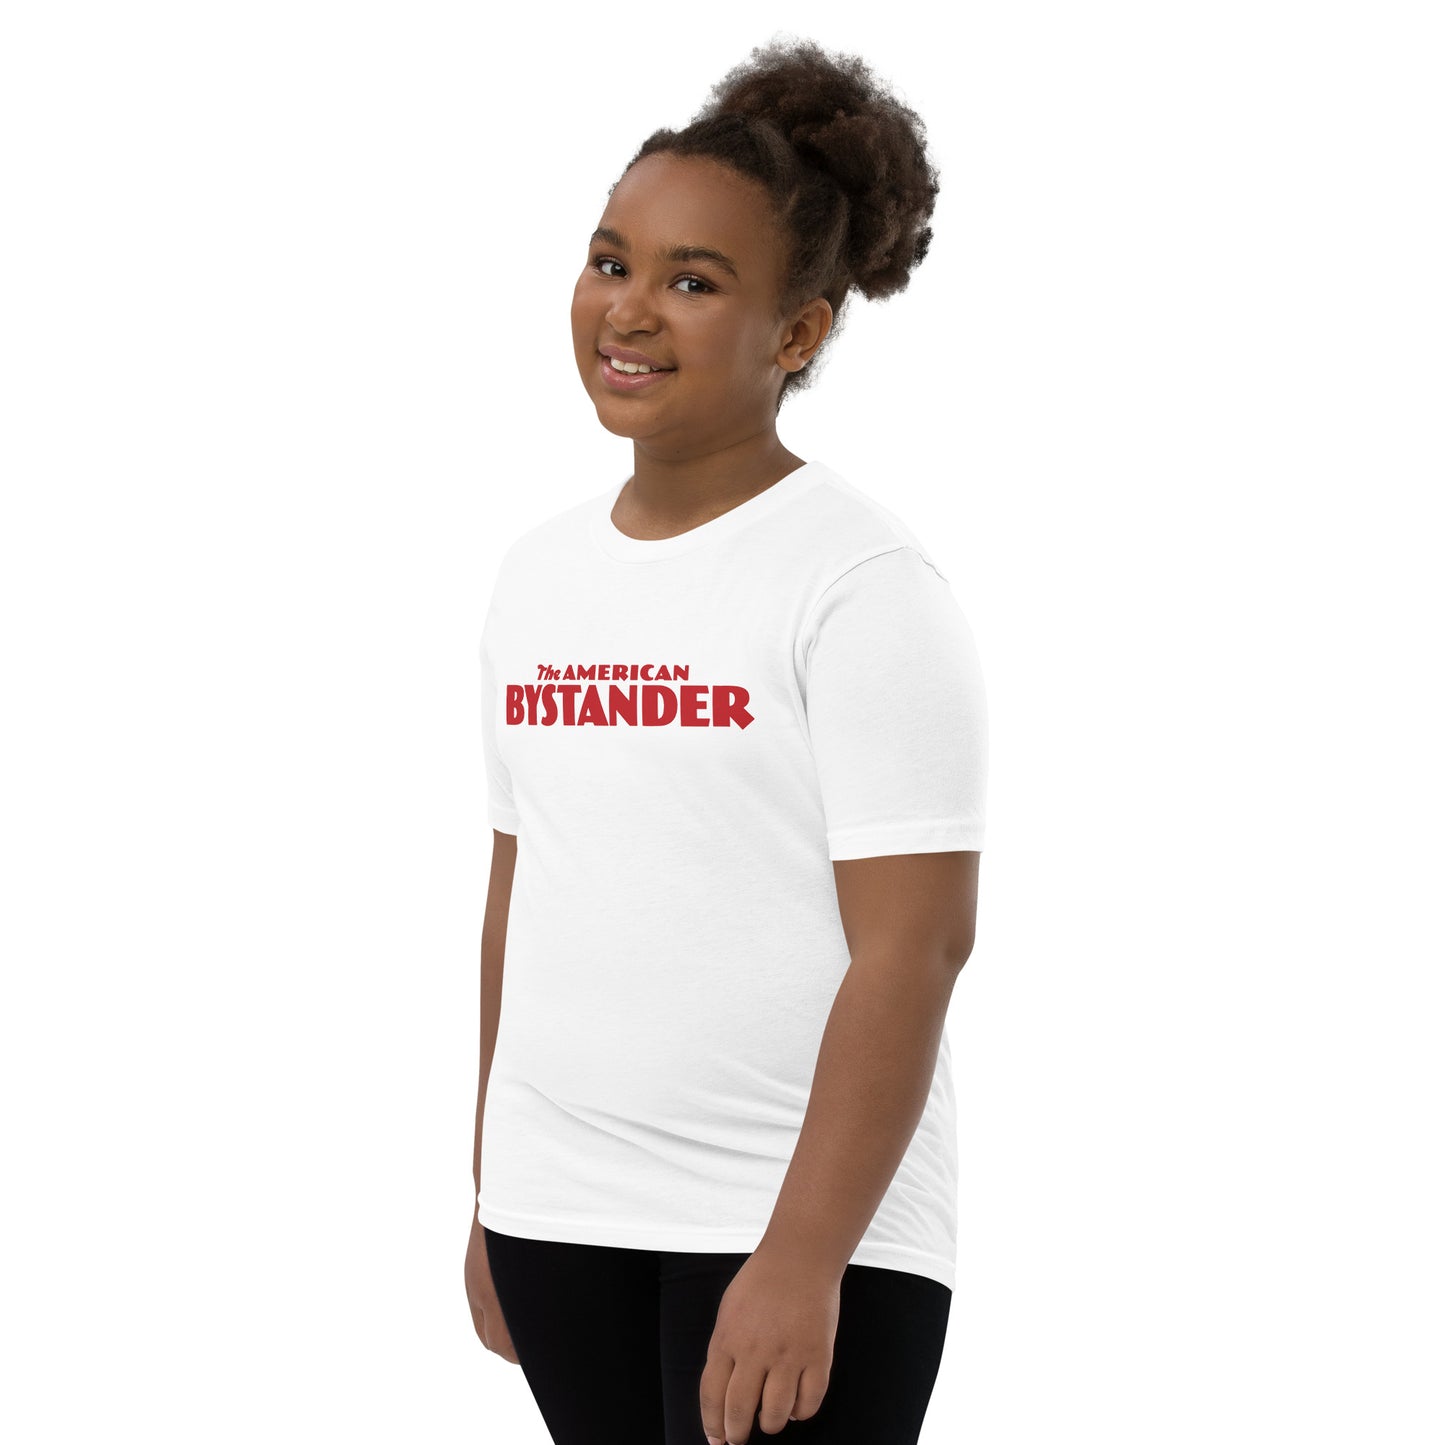 The American Bystander | The Kid's T-Shirt